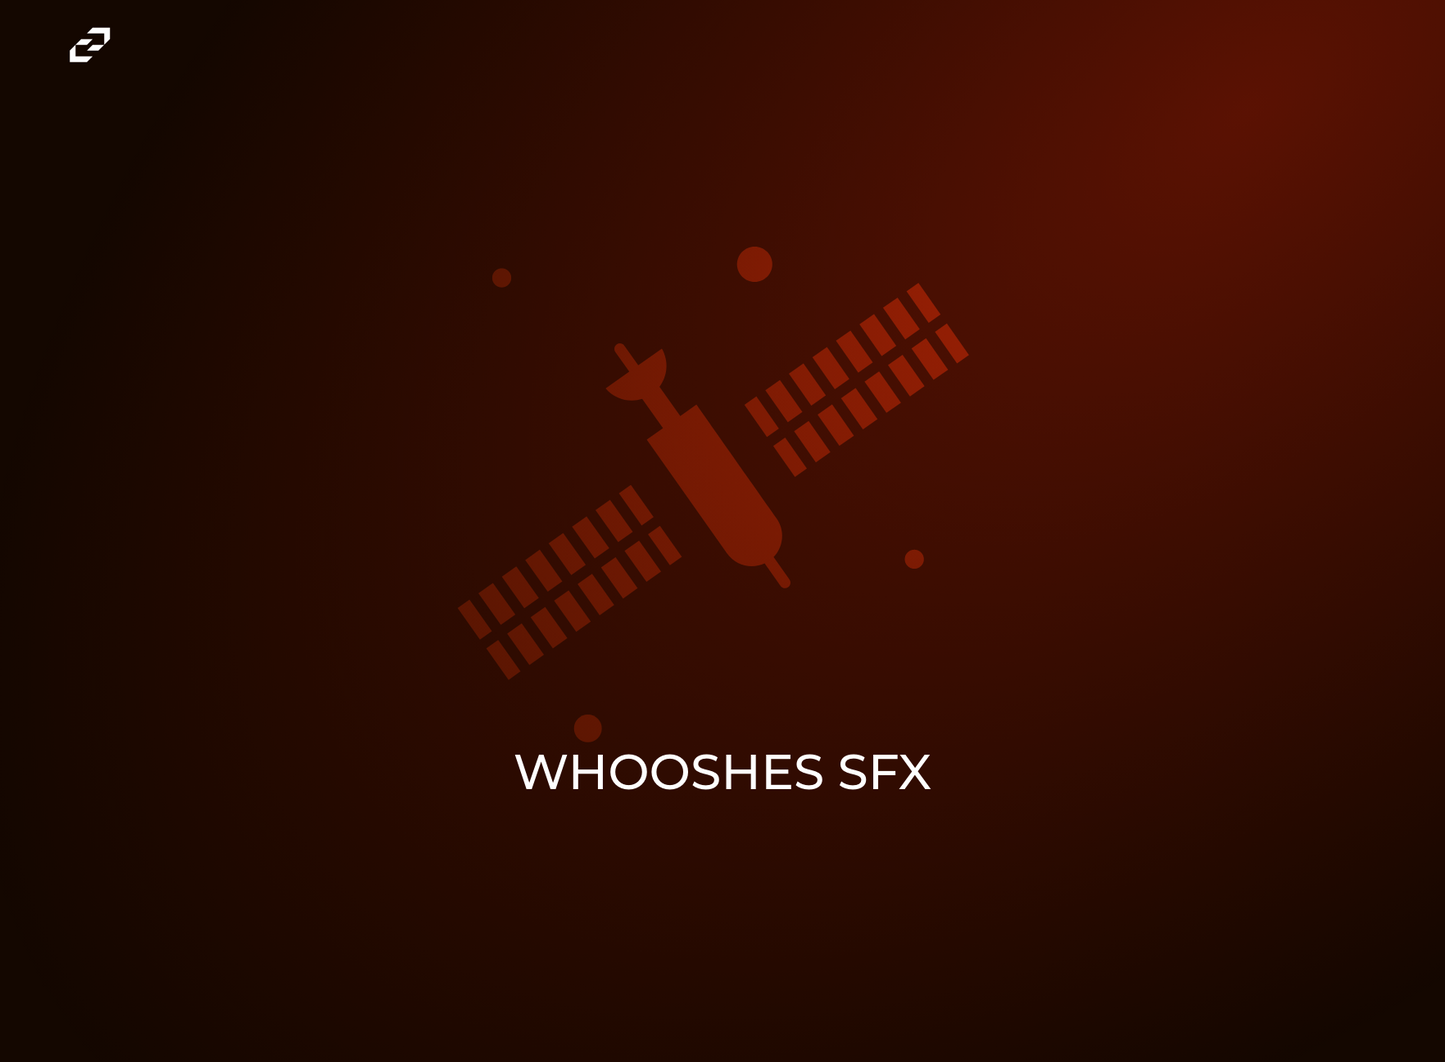   Whooshes Sound Effects - SFX for Final Cut Pro, Premiere Pro, DaVinci Resolve - C Creation Store